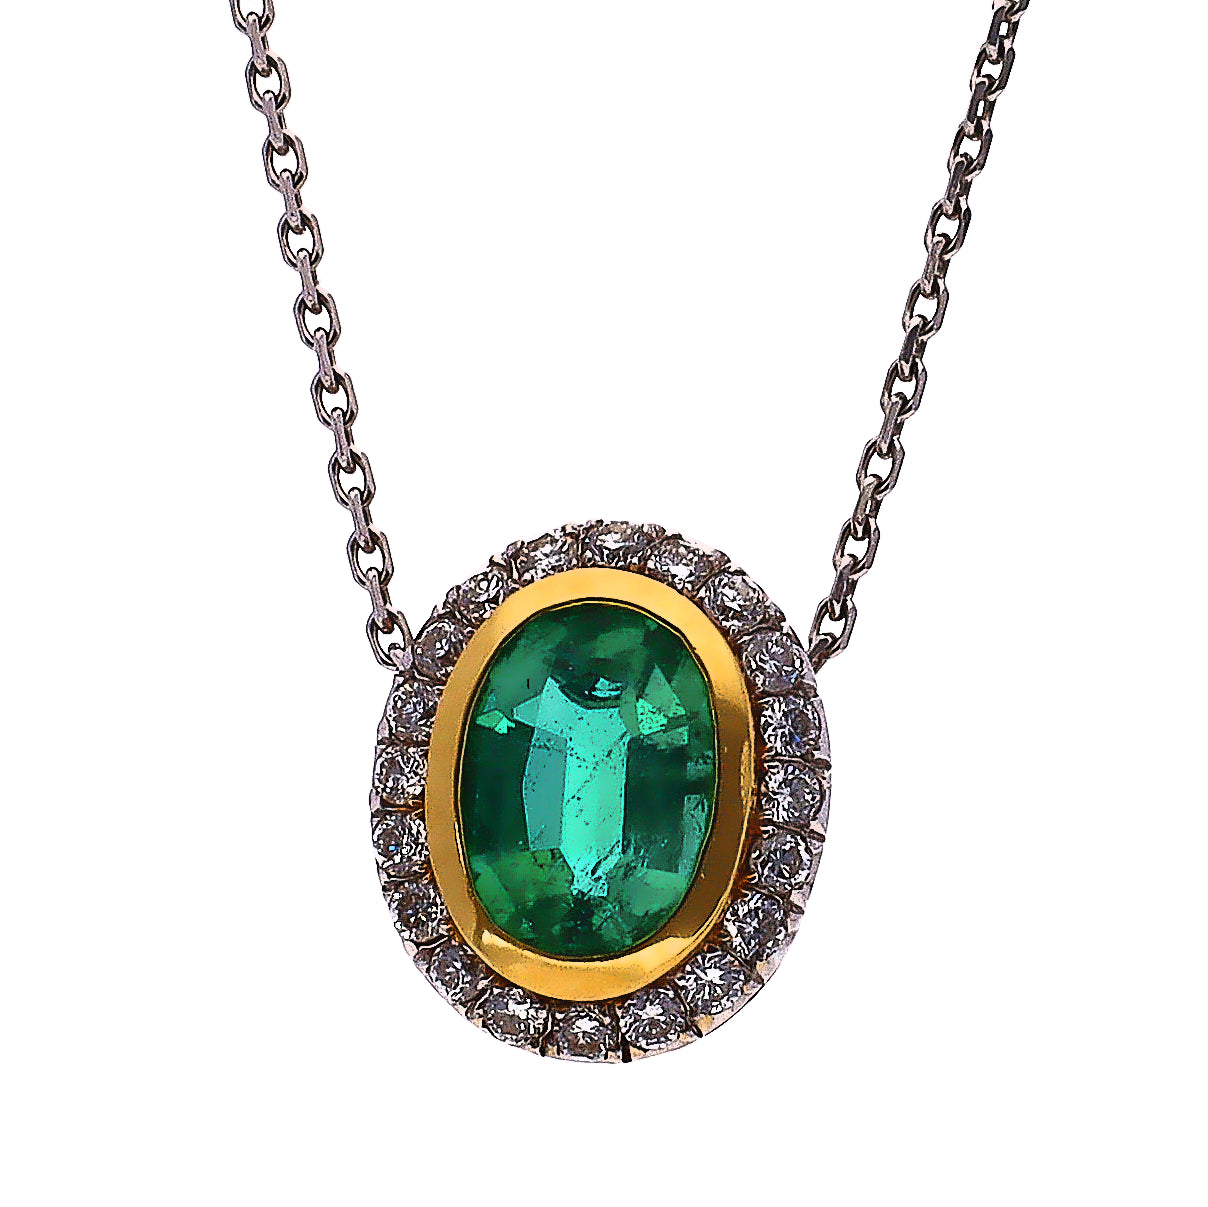 18K White and Yellow Gold Oval Emerald and Diamond Pendant Necklace